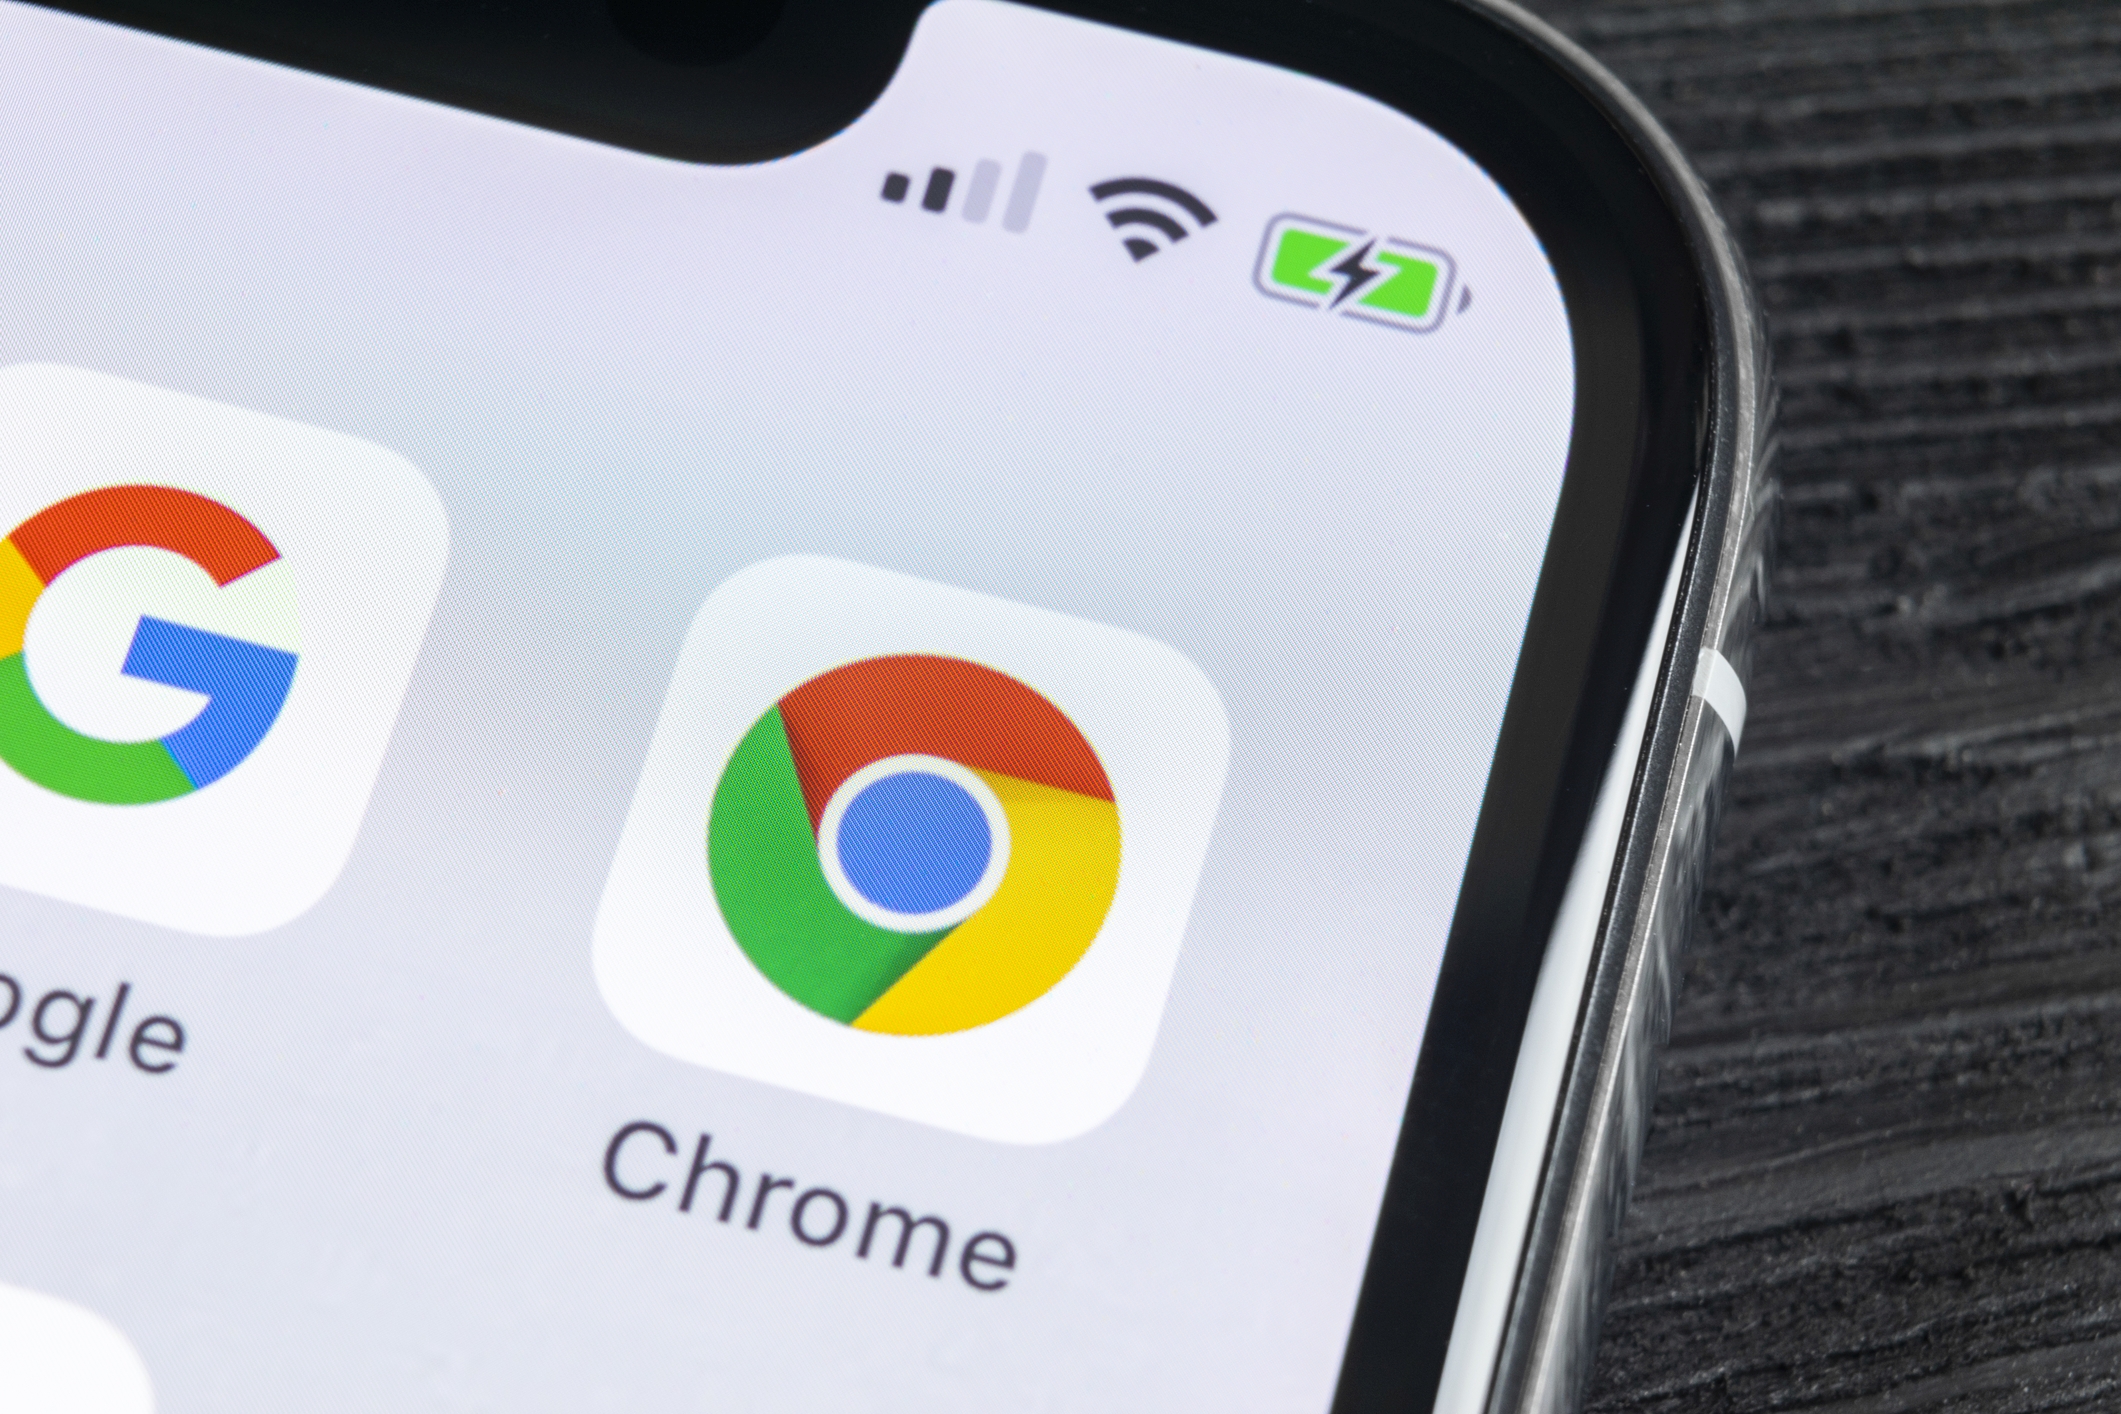 Will Chrome users soon feel the full impact of ads?